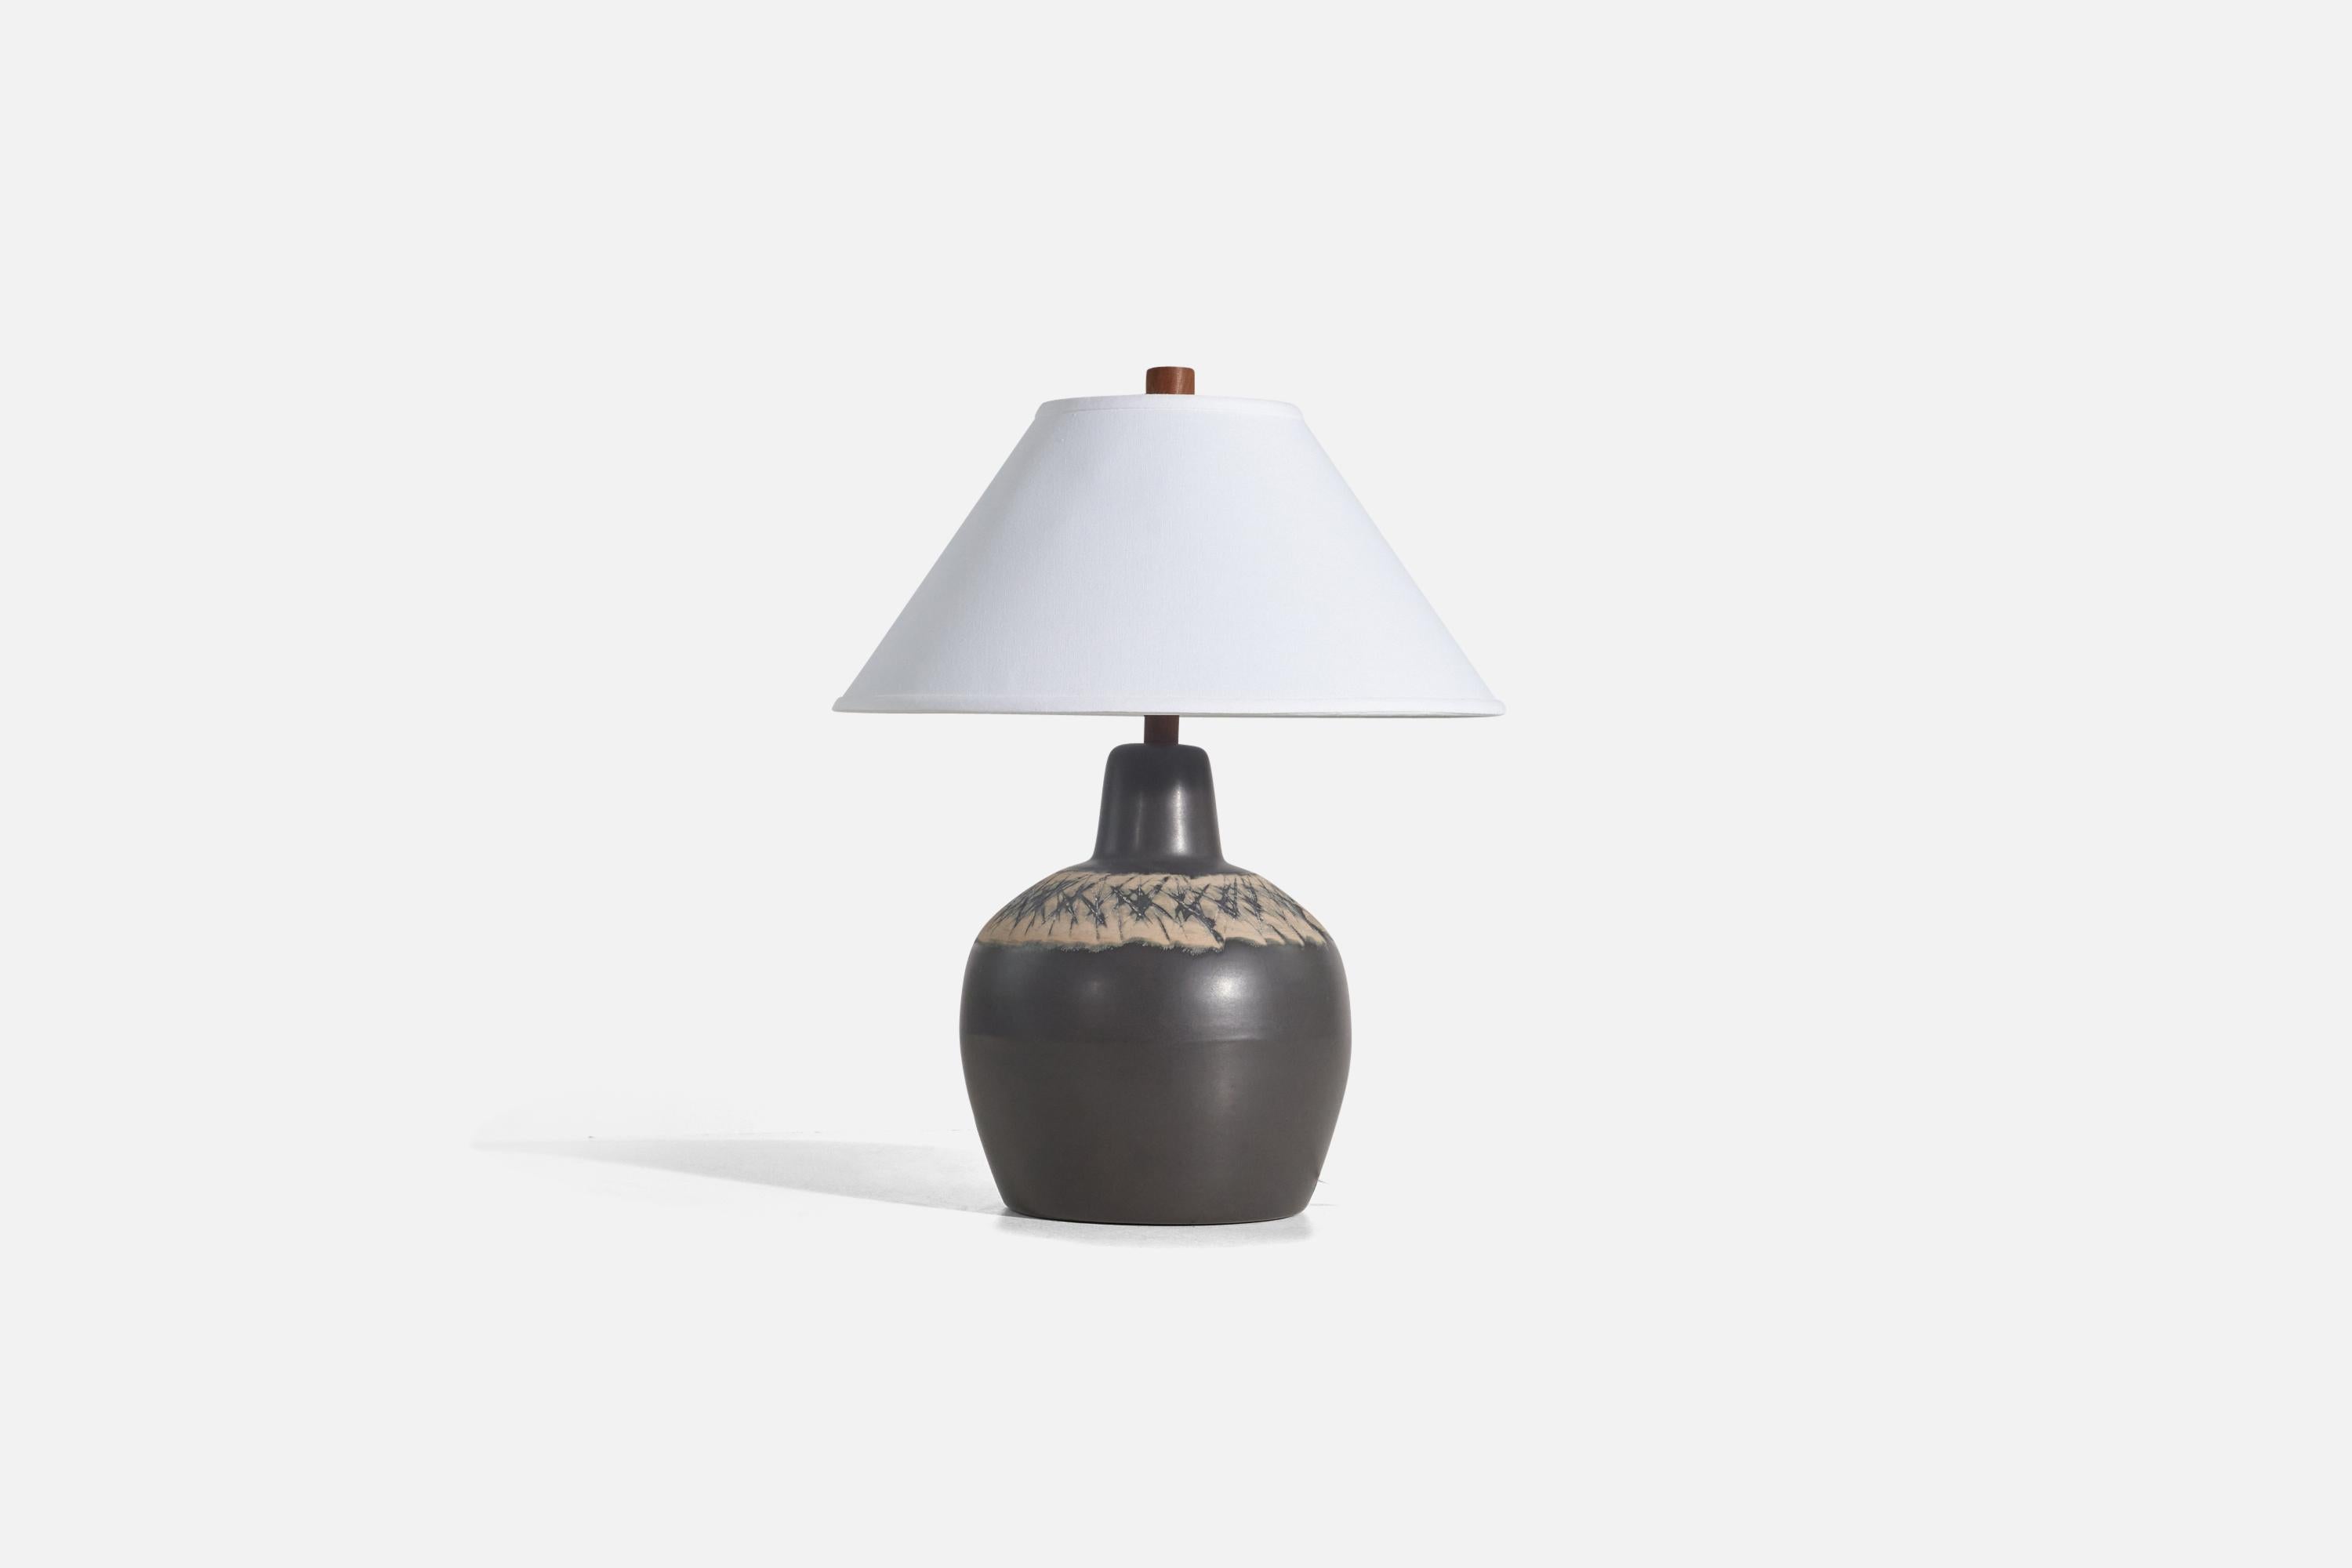 A brown ceramic and walnut table lamp designed by Jane & Gordon Martz and produced by Marshall Studios, Indianapolis, 1950s. 

Sold without Lampshade
Dimensions of Lamp (inches) : 15.31 x 9.25 x 9.25 (Height x Width x Depth)
Dimensions of Lampshade